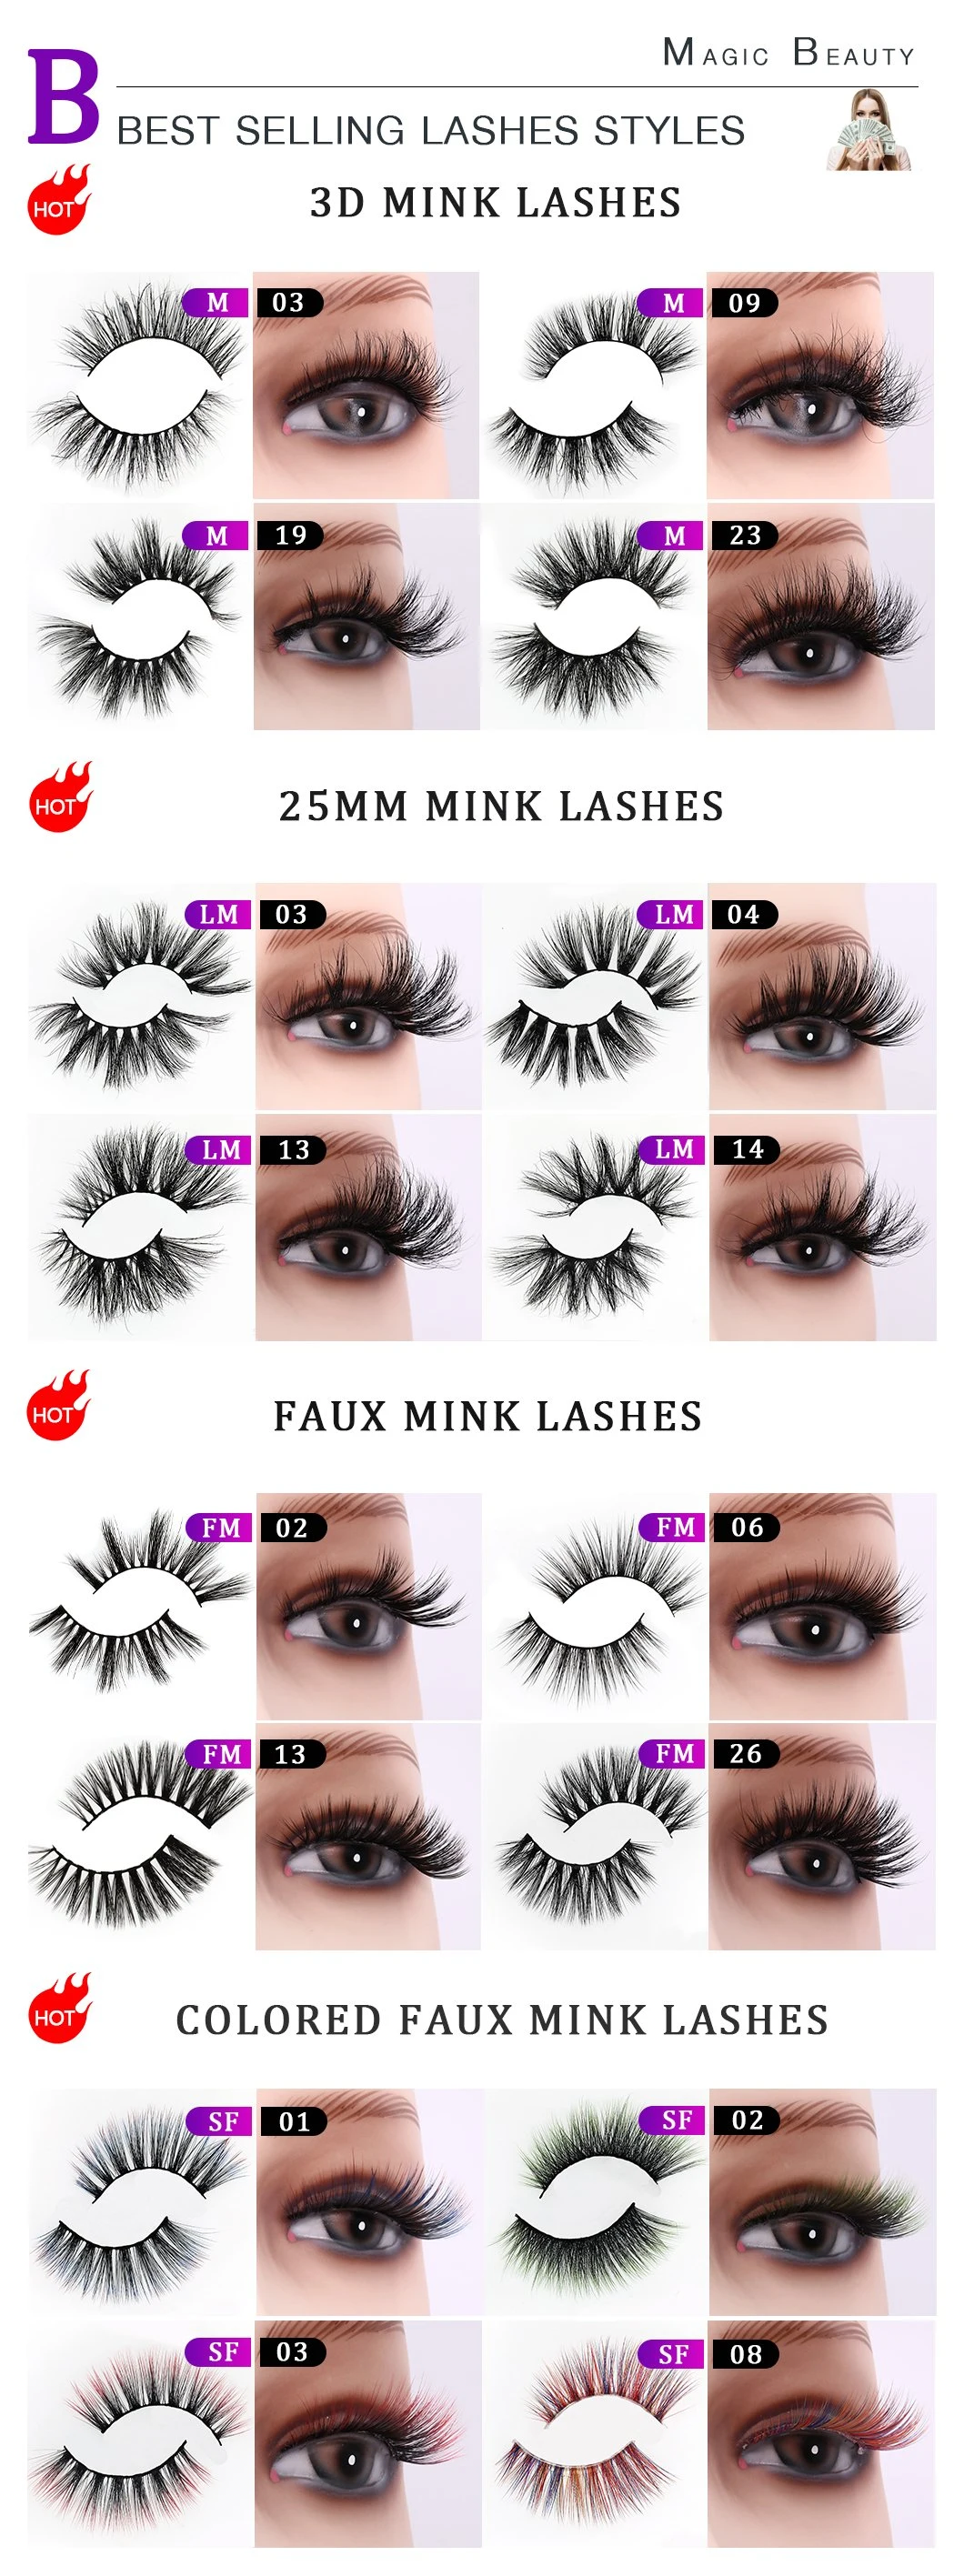 Lm06 Lm09 Wholesale Mink Lashes Extension 5D 25mm False Eyelashes with Package